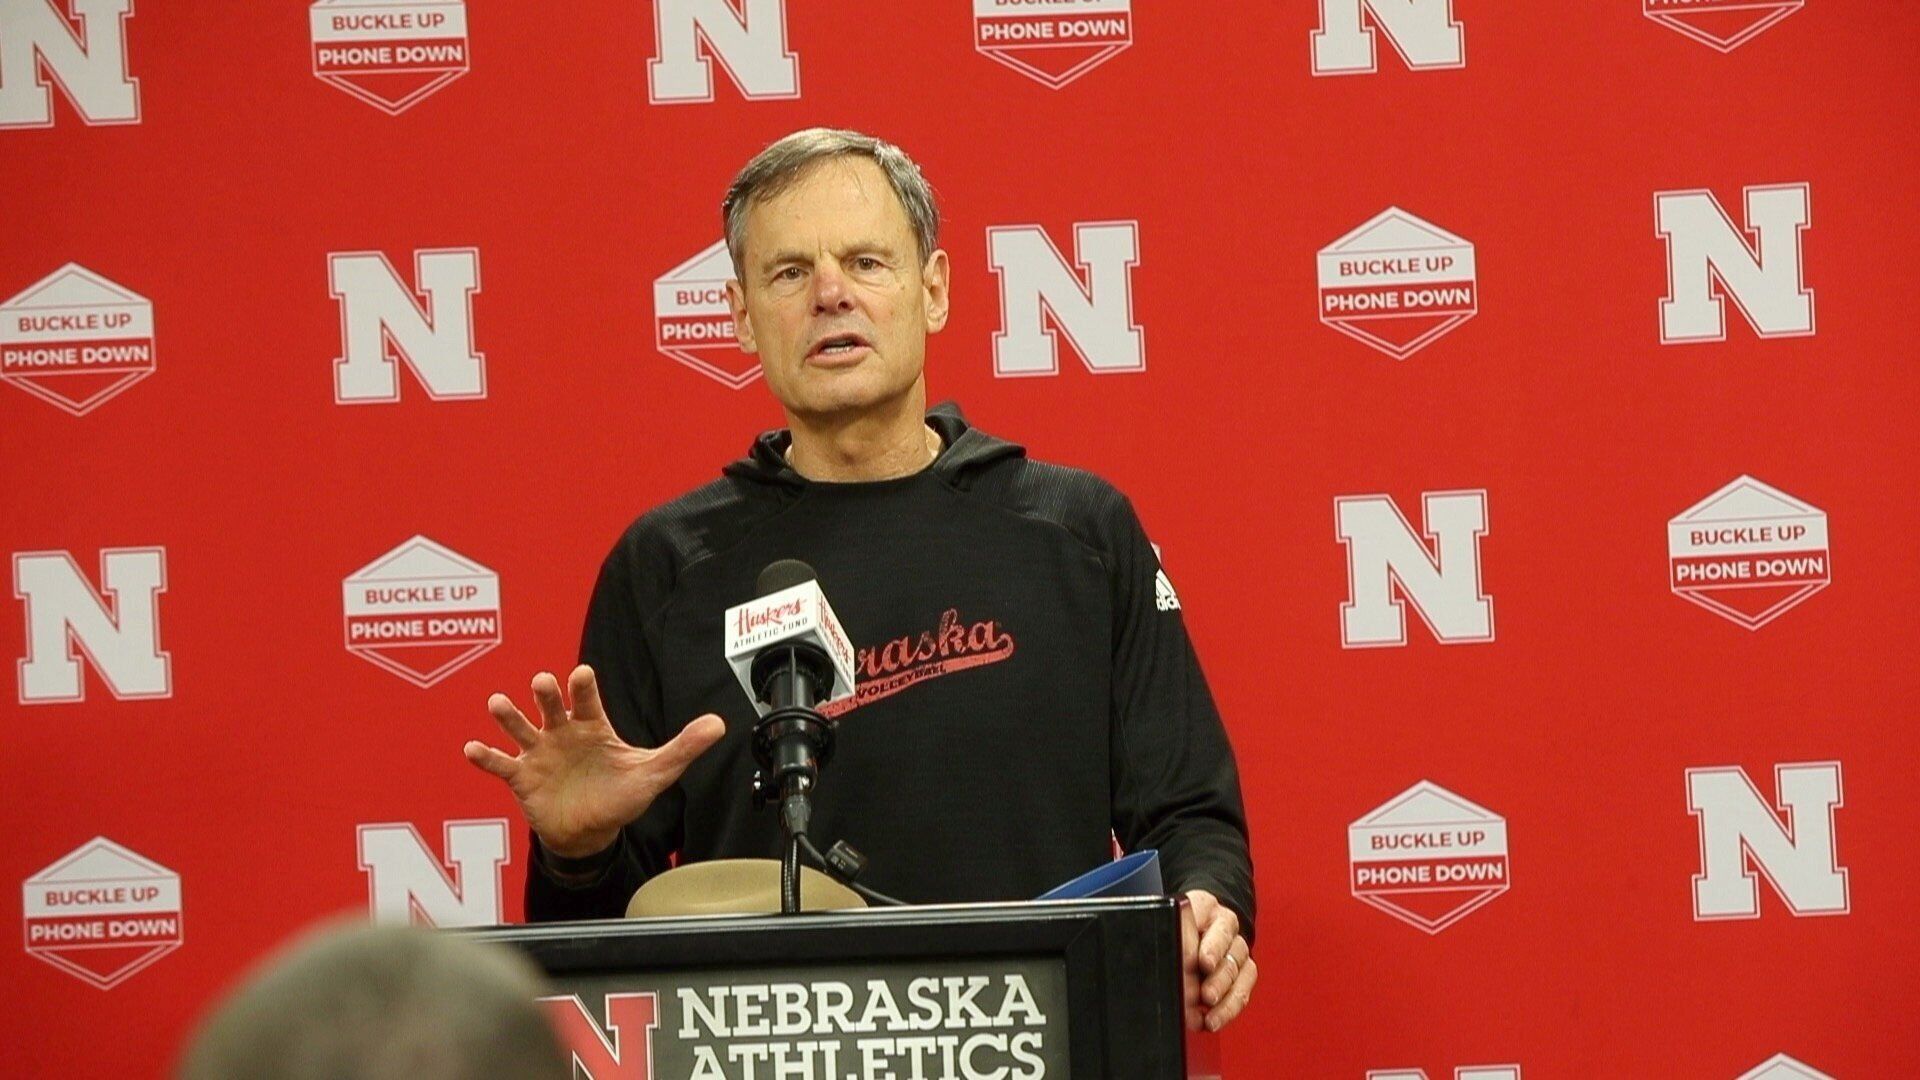 Demand for Nebraska volleyball at Memorial Stadium tickets causes online hiccup